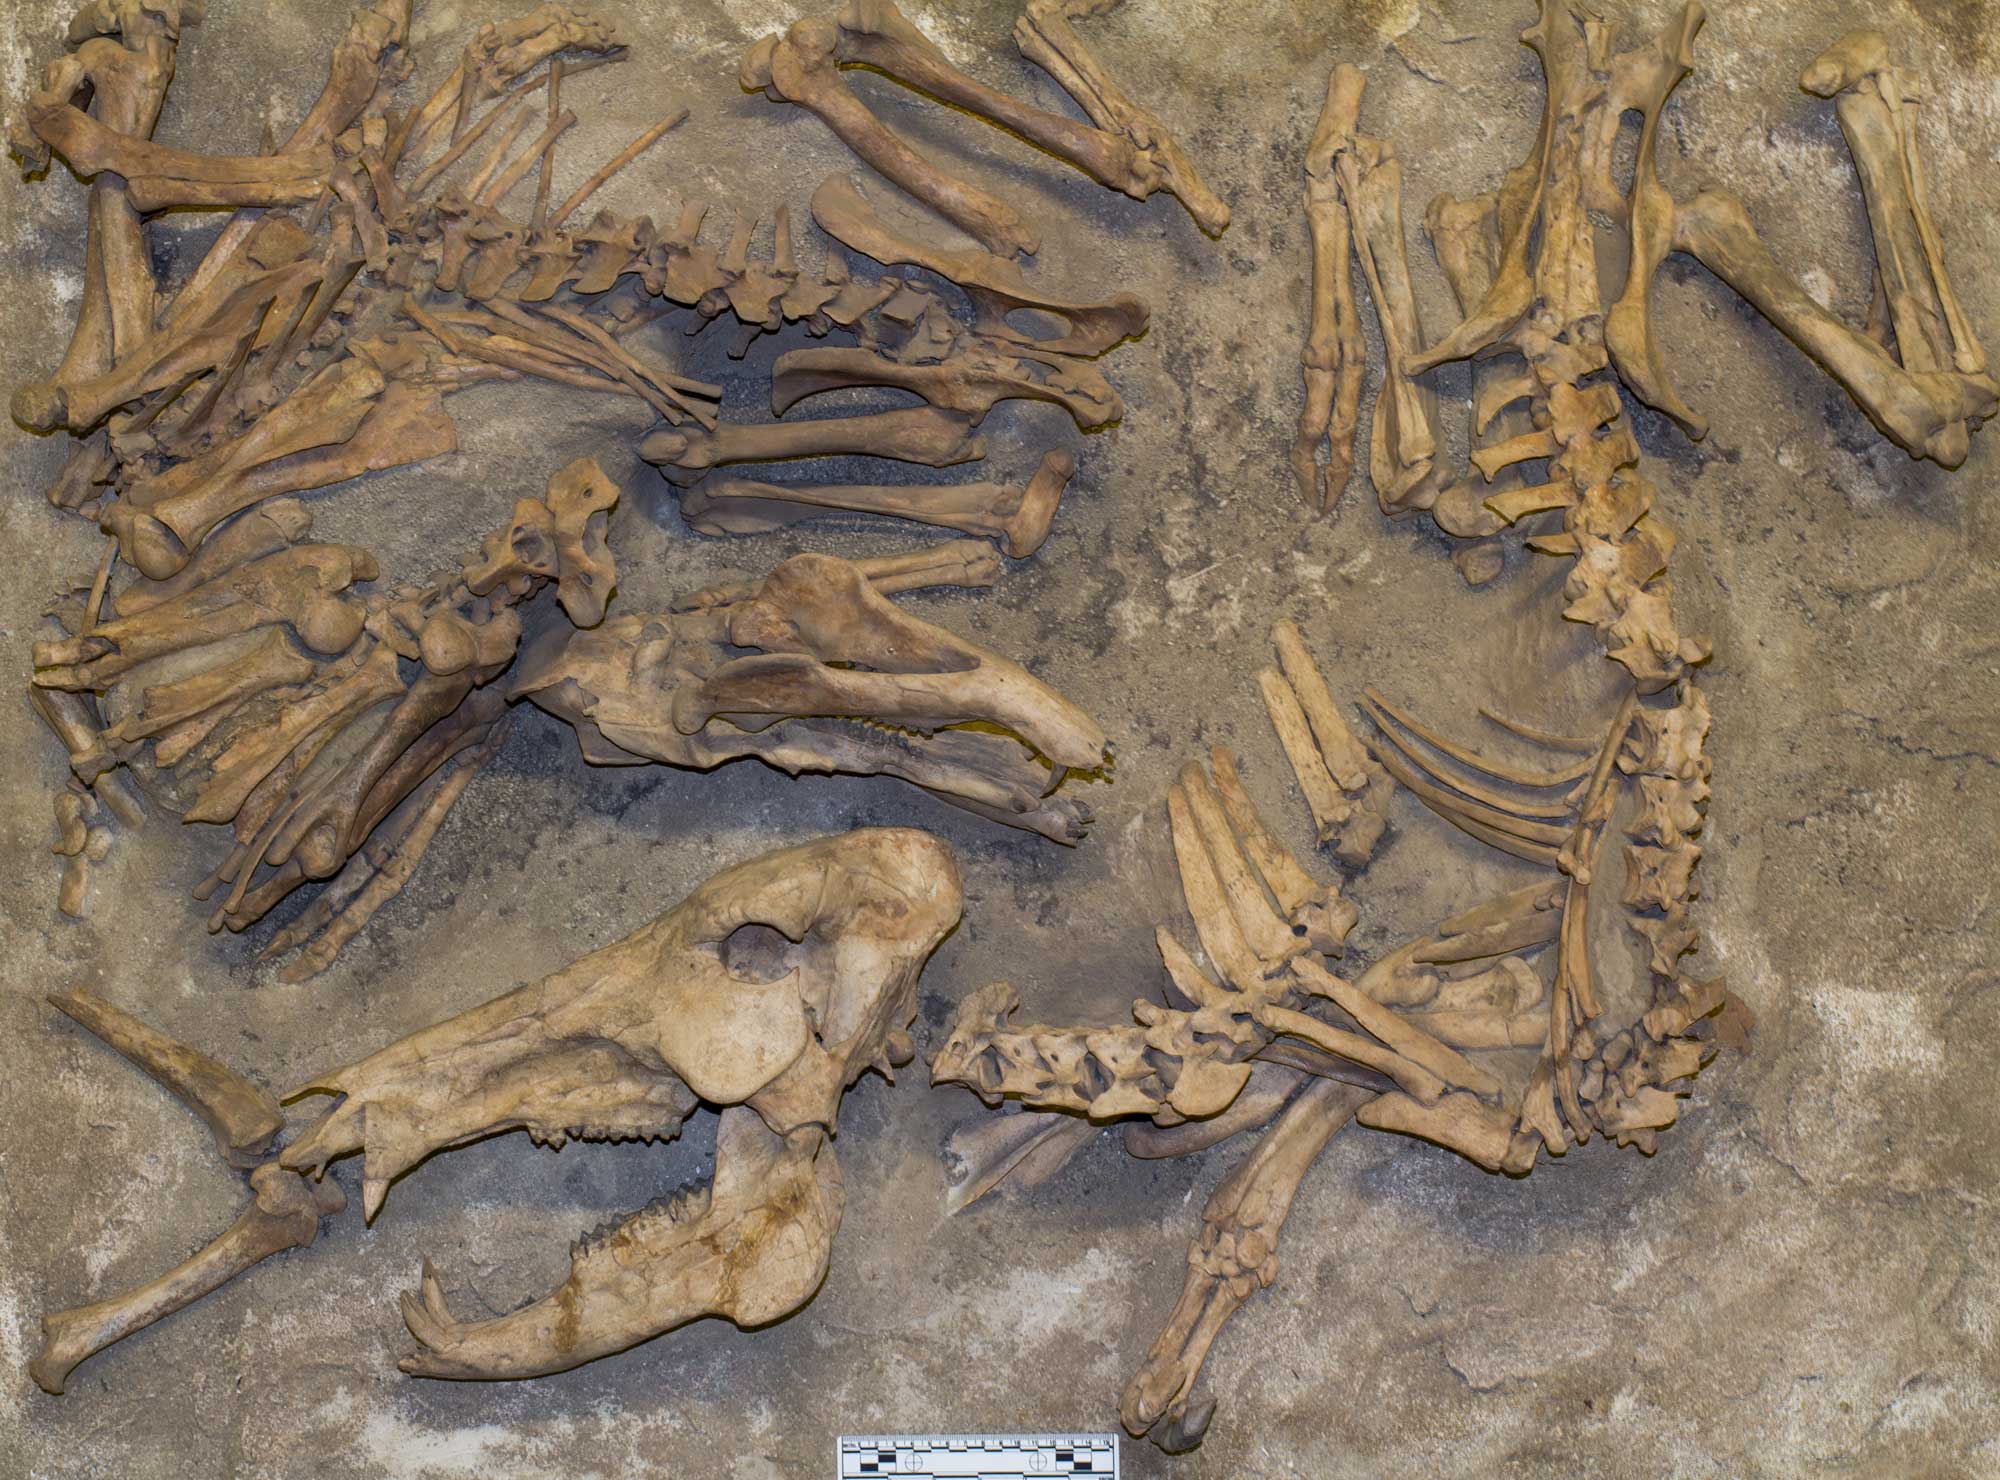 Photograph of bones of a peccary from the Pliocene Glenns Ferry Formation of Idaho. The photo shows a skull at lower left with open mouth and a jumble of other bones scattered around it. All are exposed on a brown rock slab. The bones are off-white to light brown in color.